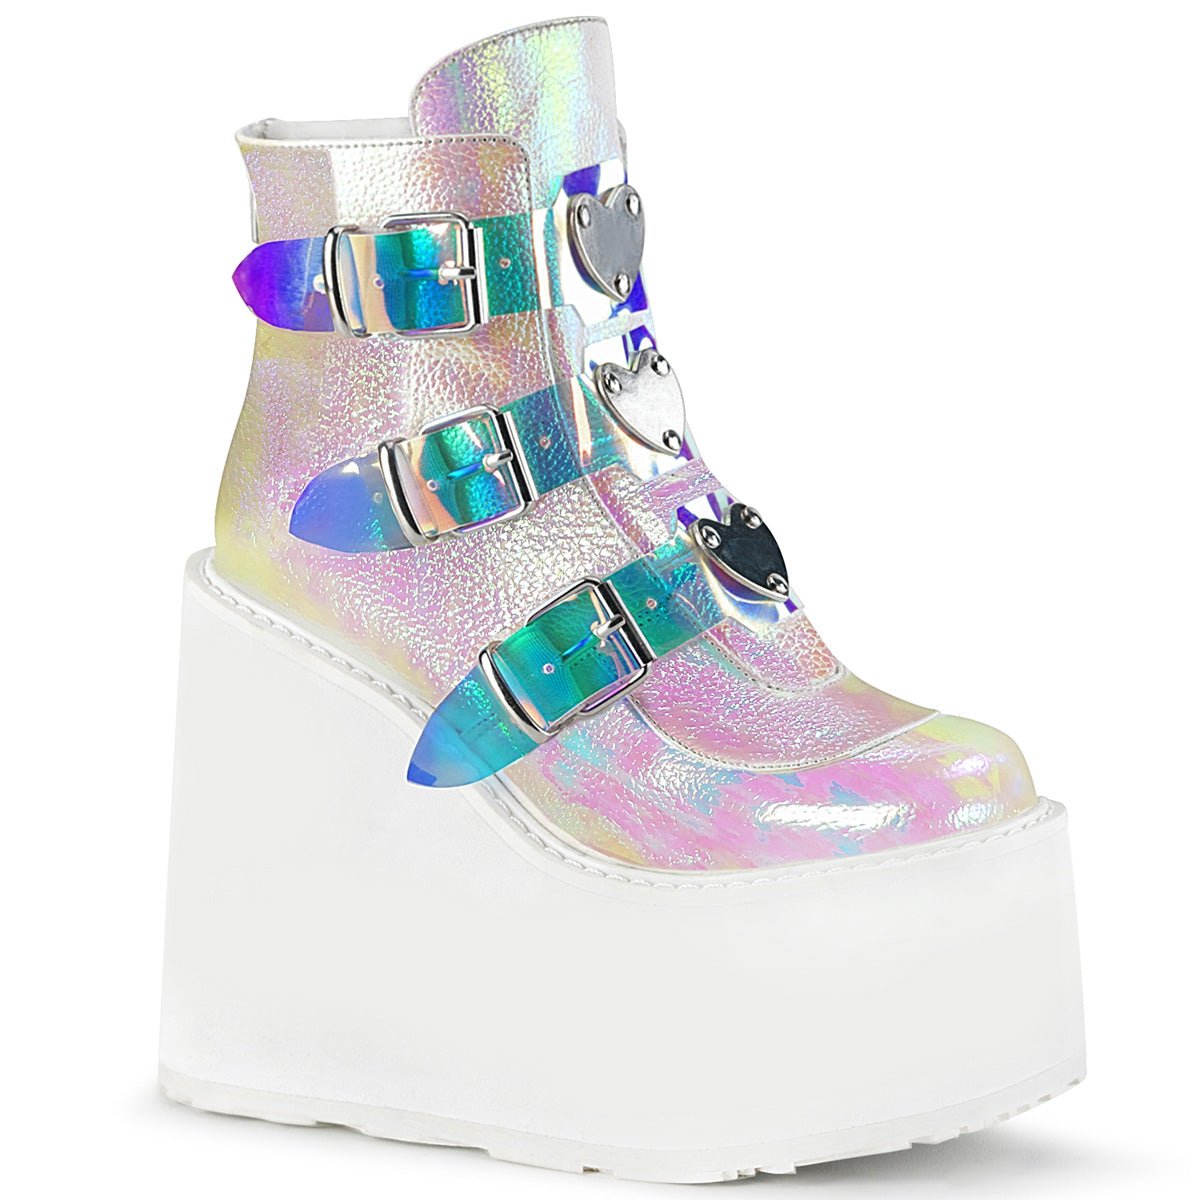 Too Fast | Demonia Swing 105 | Pearl Iridescent Vegan Leather Women's Ankle Boots